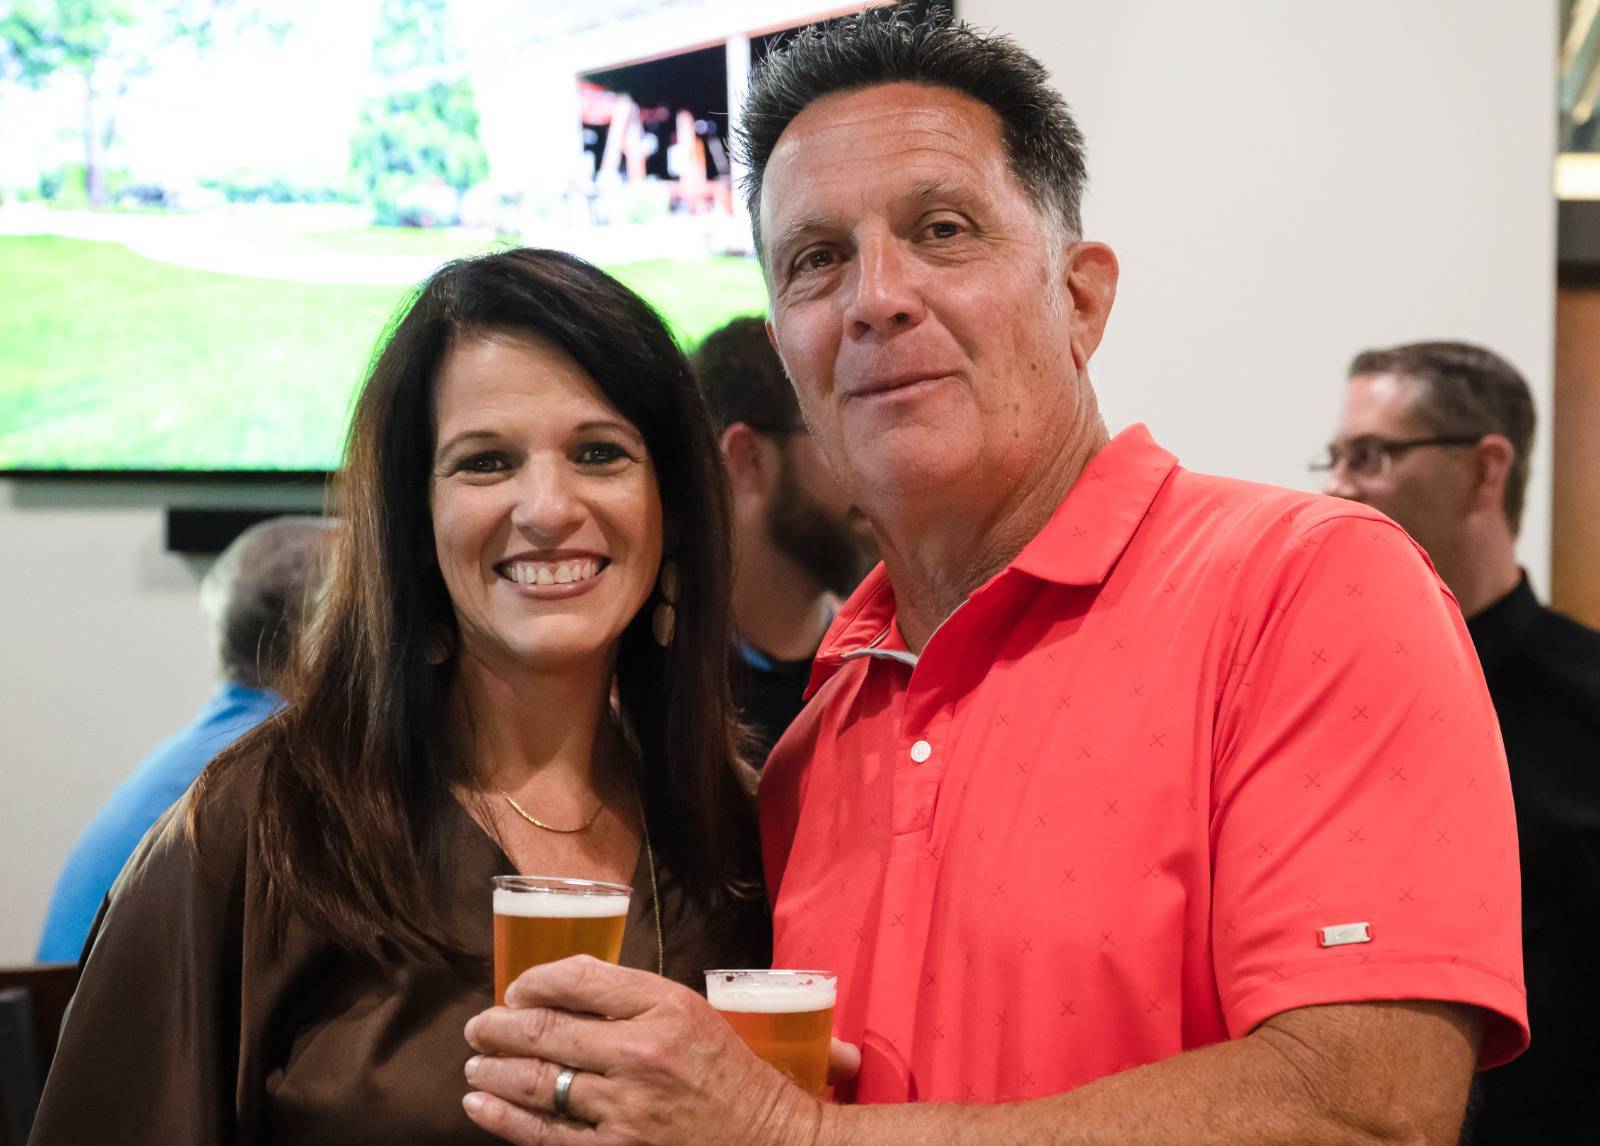 Two guests enjoying beer at the event.